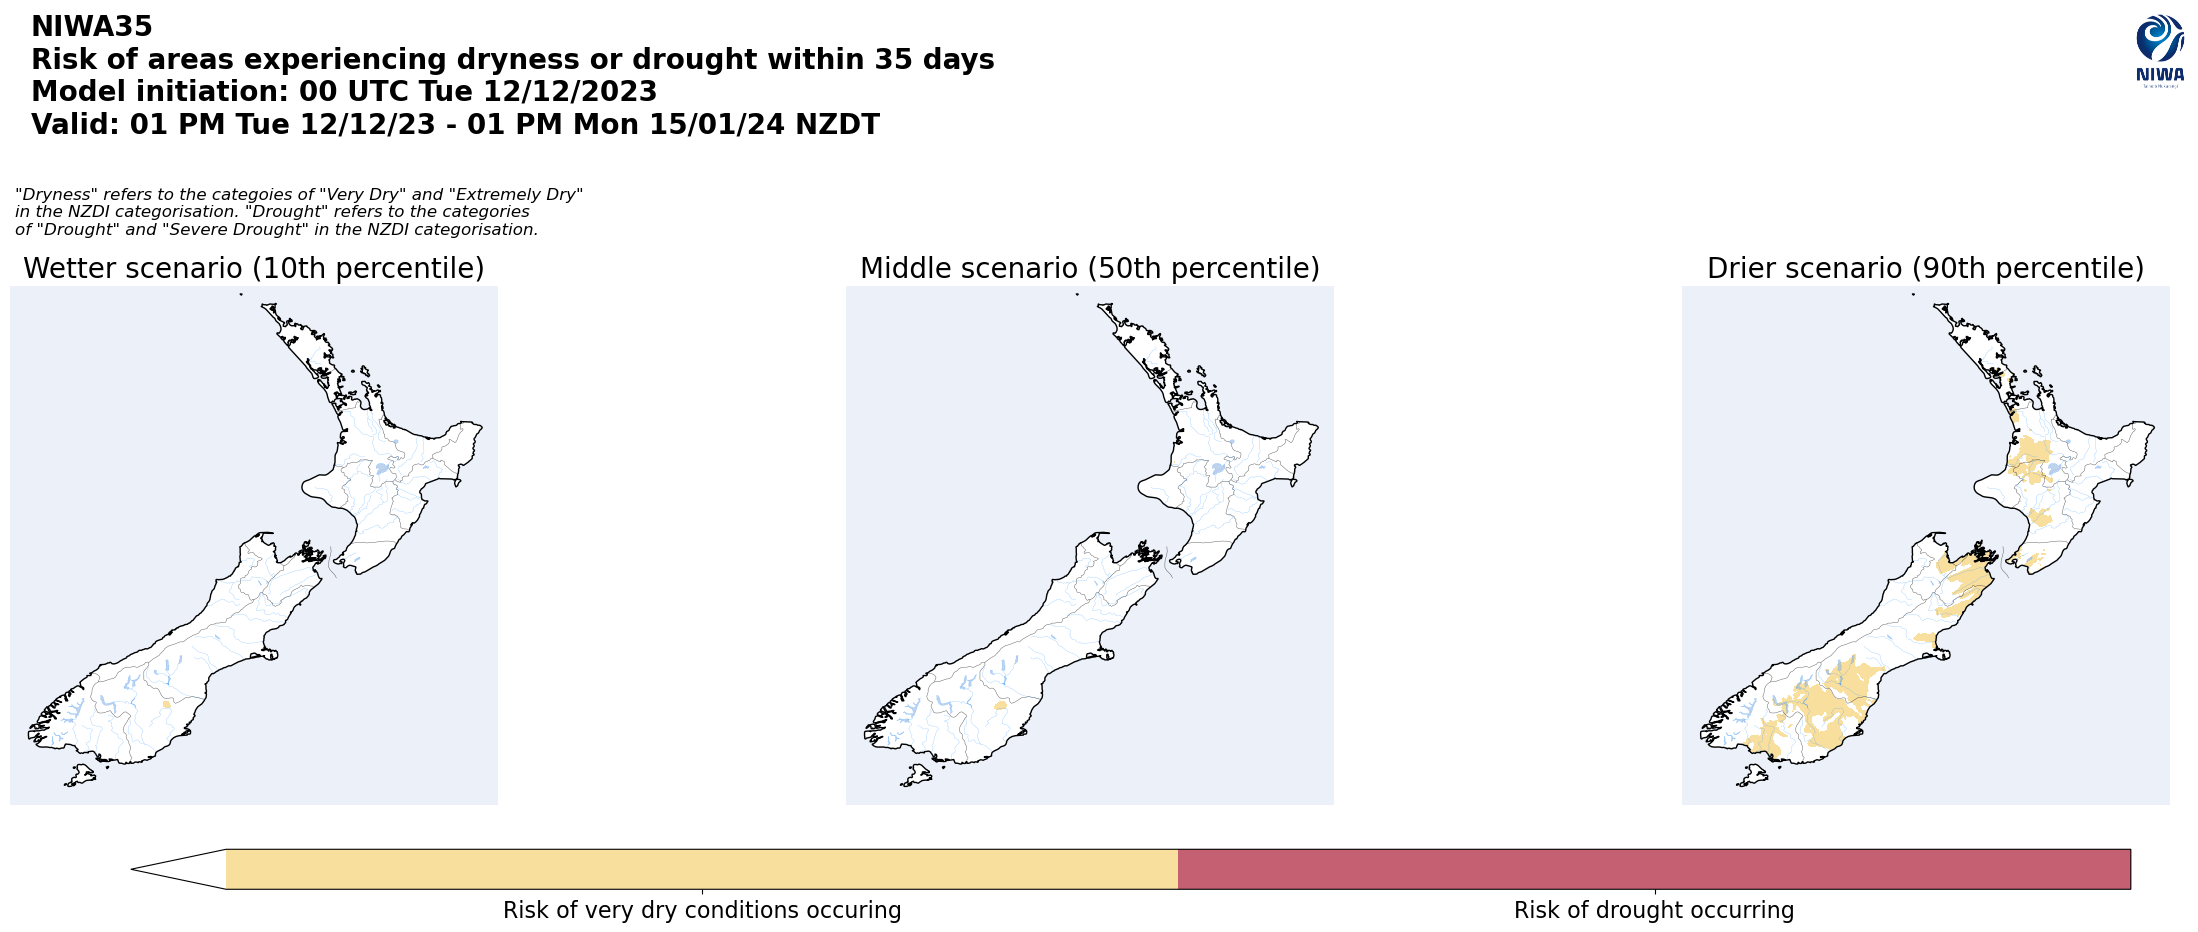 Risk of areas experiencing dryness or drought within 35 days from 12 December 2023